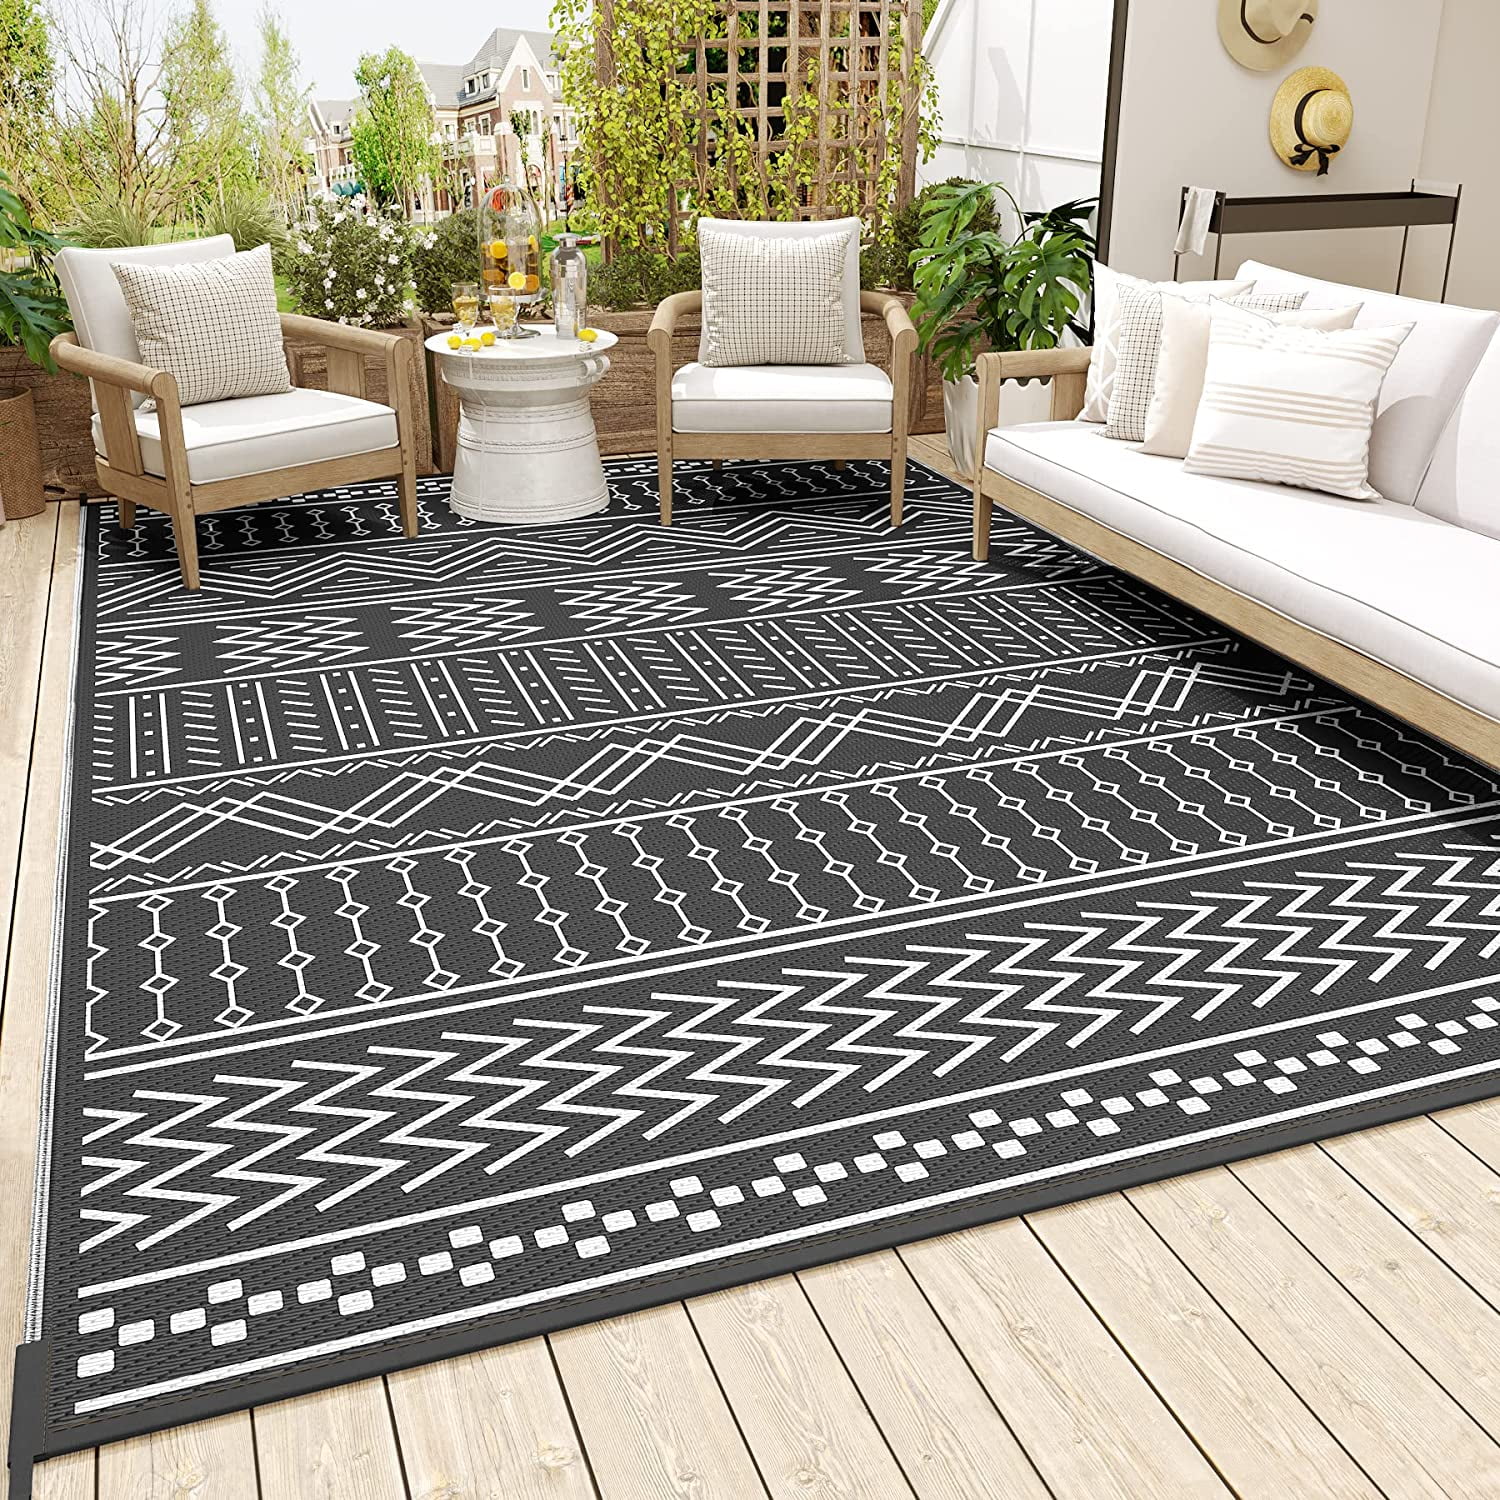 SIXHOME Outdoor Rug 5'x8' Waterproof Patio Rug Reversible Indoor Outdoor Rug Lightweight Plastic Straw Rug for RV Camping Deck Balcony Boho Porch Decor Black and White